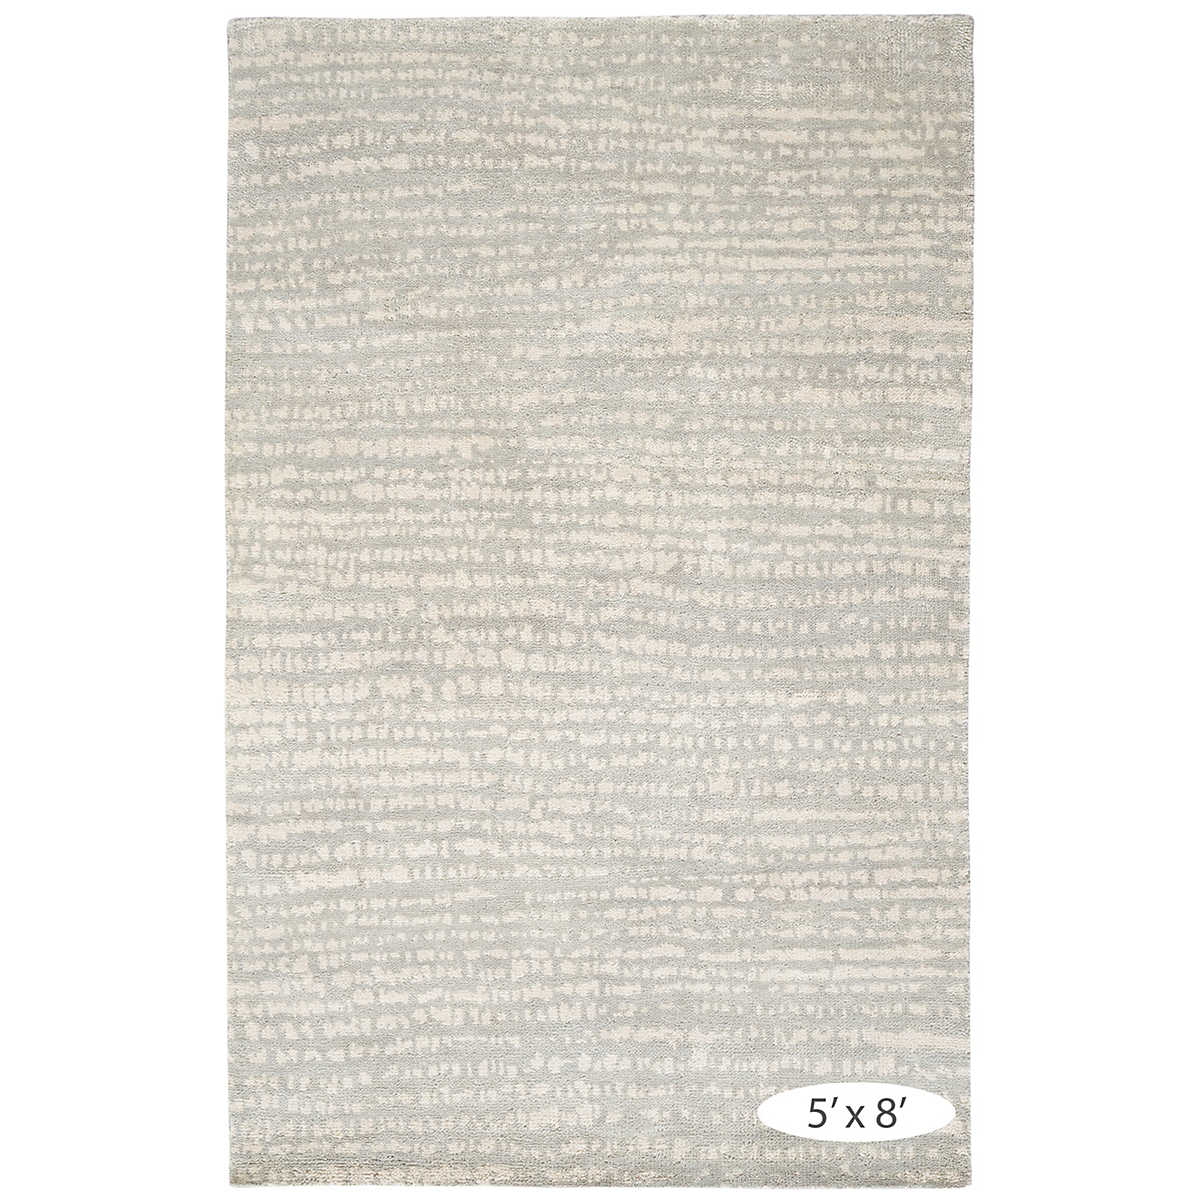 The Shepherd Oatmeal Rug deeply dense and cushy pile serves to highlight the beauty of the unbleached color variations of natural wool fleece. The random stippling of irregularly shaped splotches is a signature motif of Marie Flanigan, an award-winning interior designer. Amethyst Home provides interior design services, furniture, rugs, and lighting in the Des Moines metro area.